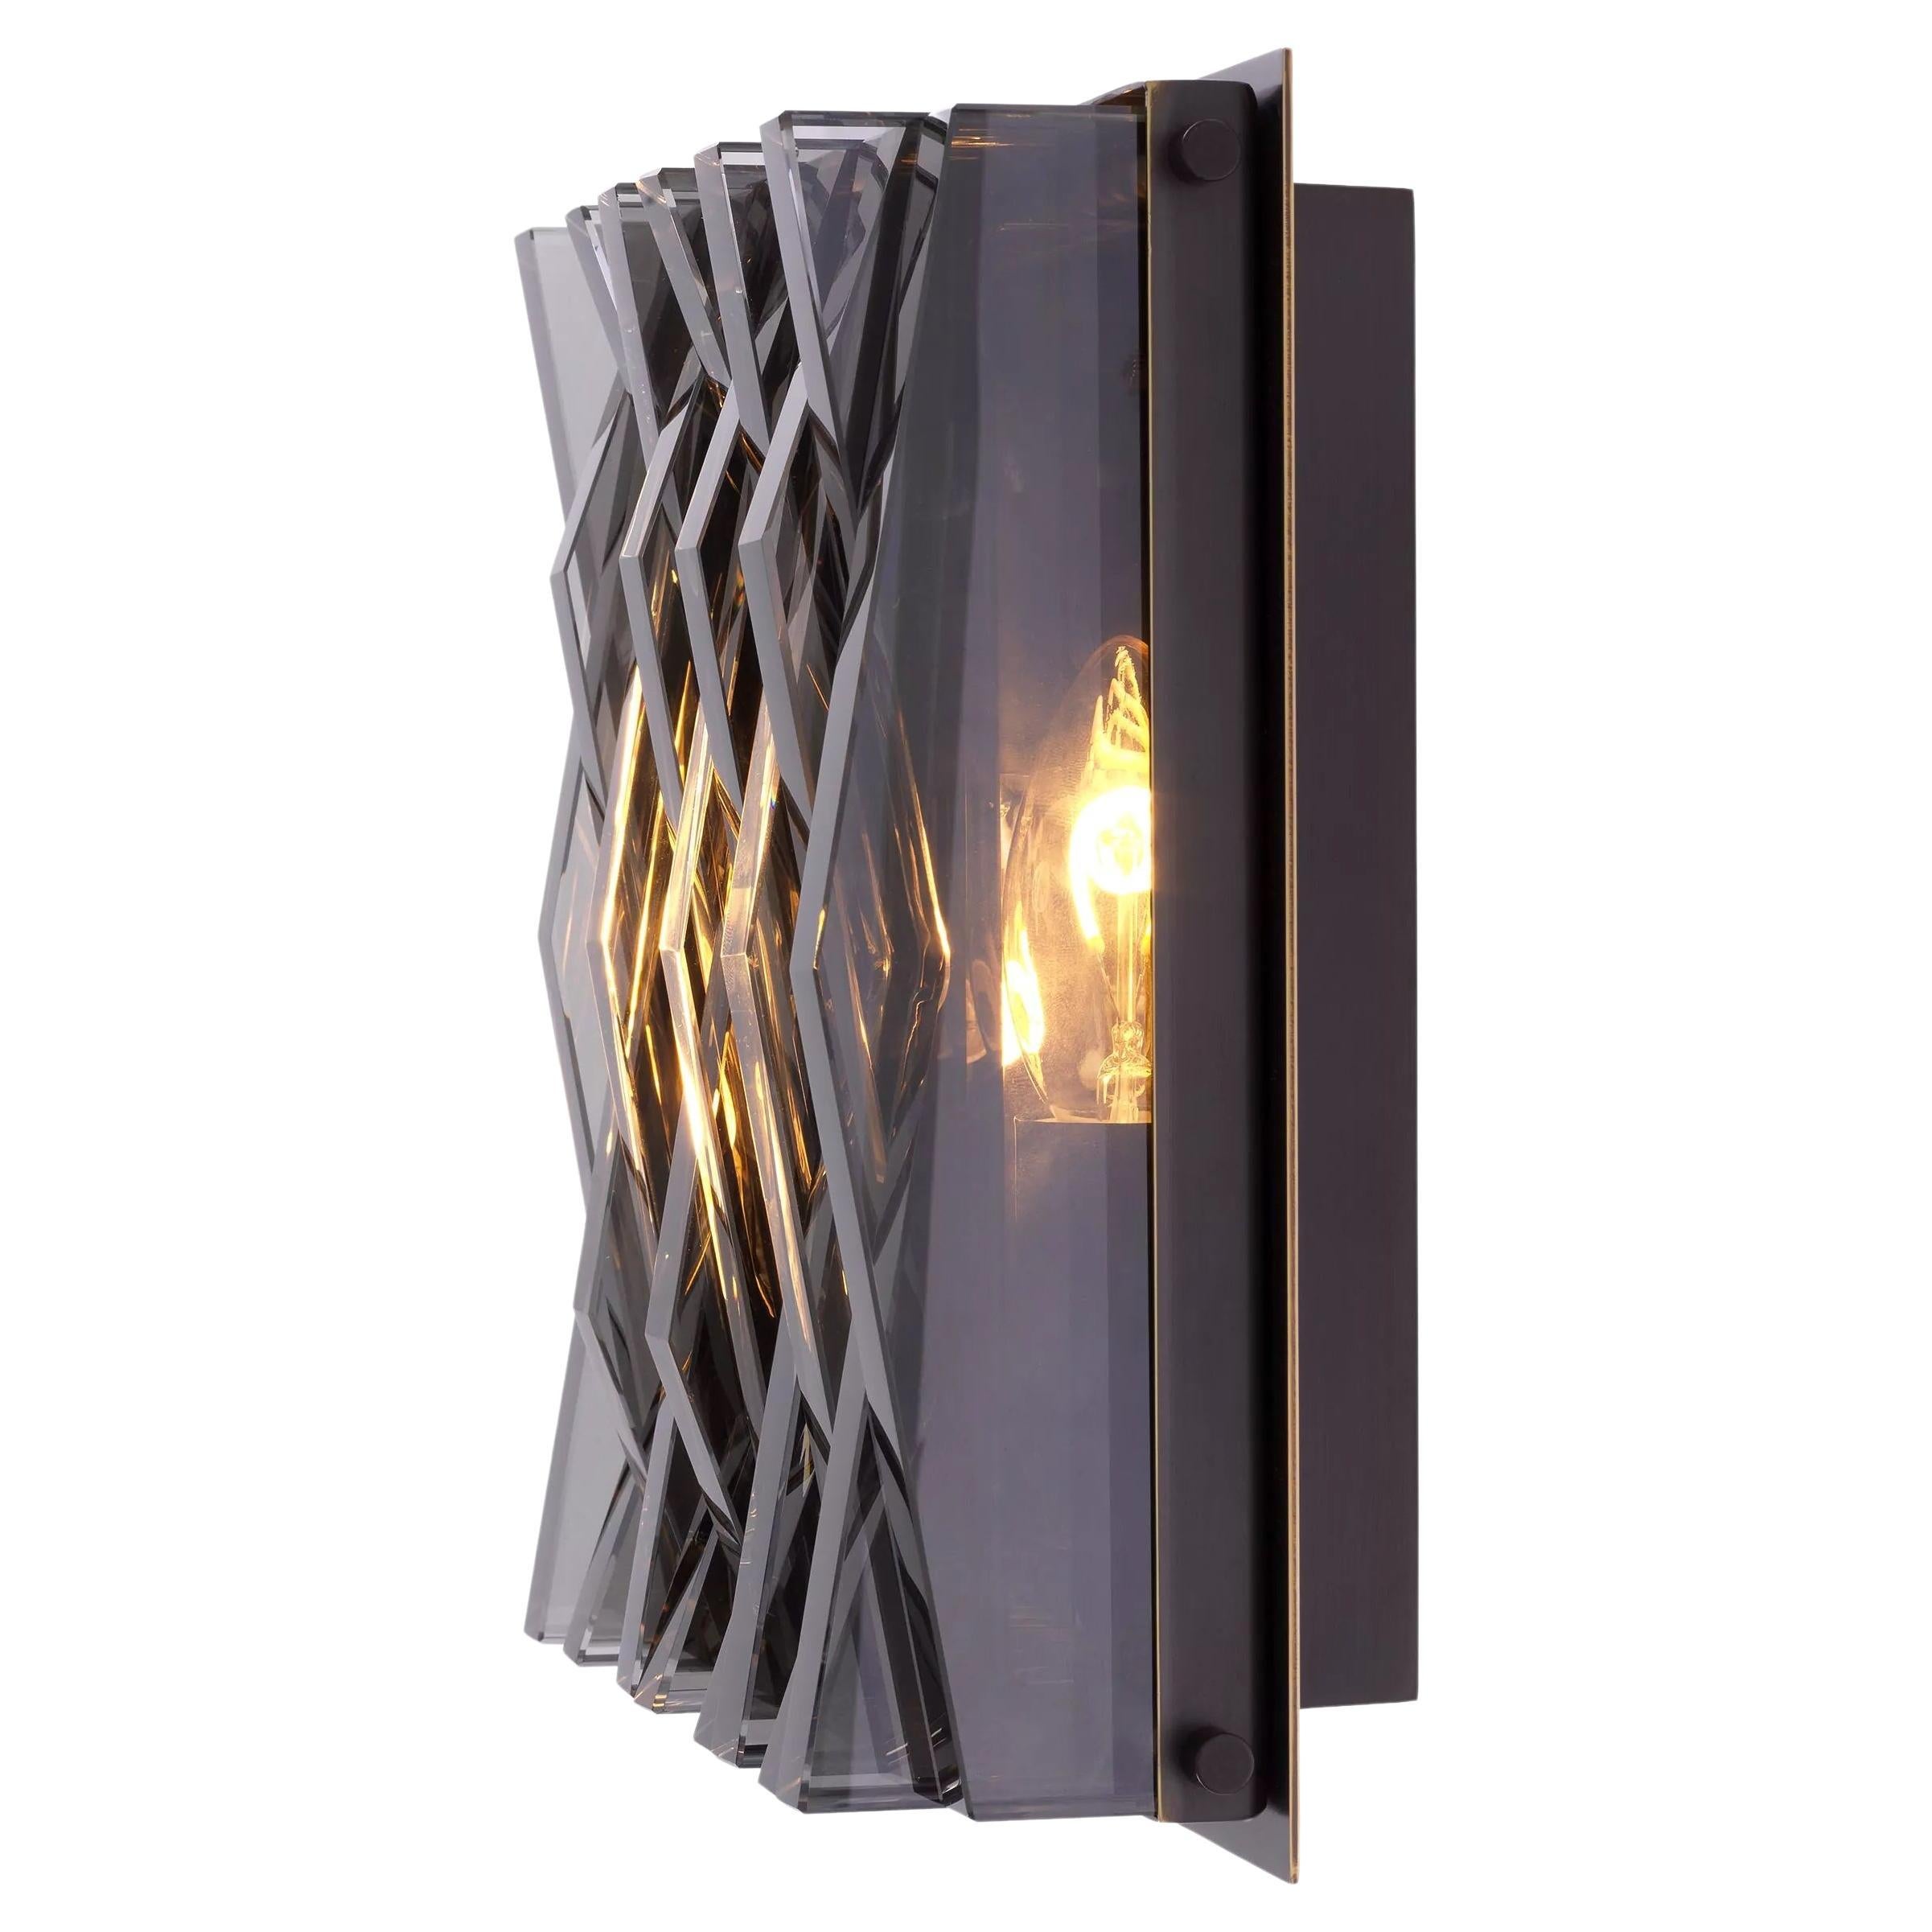 1960s-1970s Italian Design And Brutalist Style Bronze and Smoke Glass Wall Light